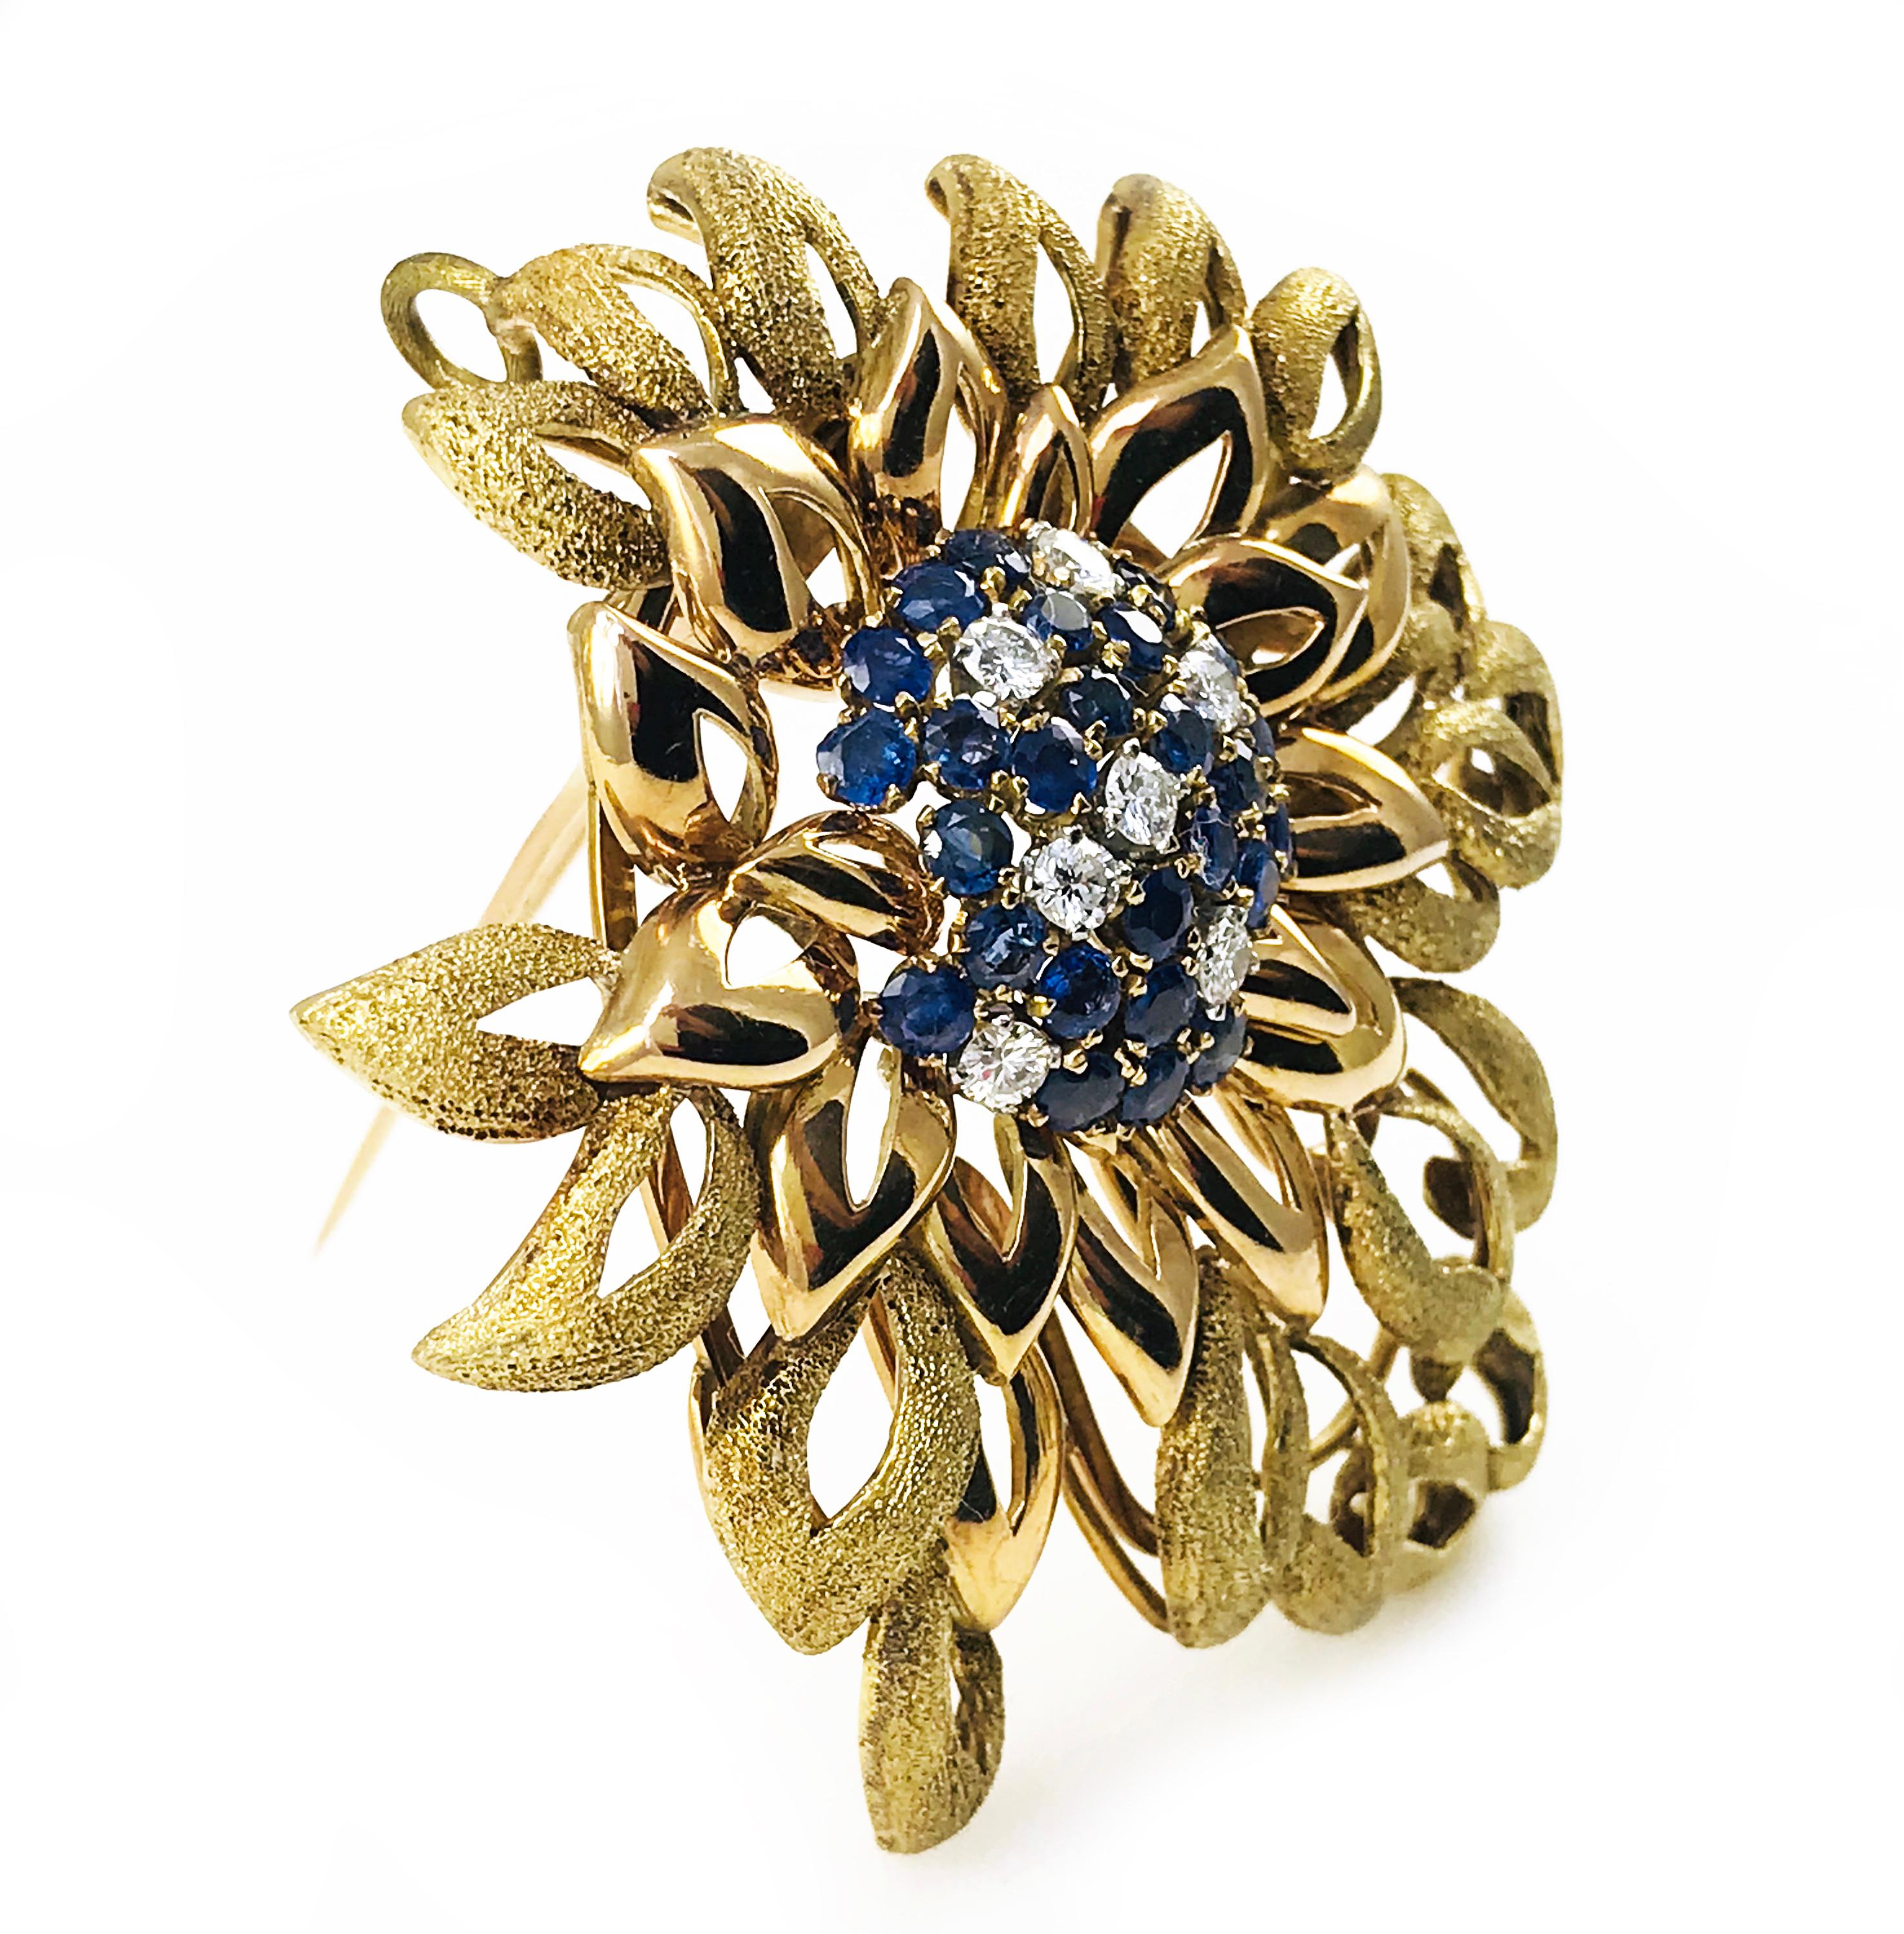 14 Karat Rose and Yellow Gold Flower-Shaped Natural Blue Sapphire Diamond Pendant Brooch. The brooch features seven round diamonds and twenty-six round blue sapphires. The individual flower petal outlines are smooth closest to the center and